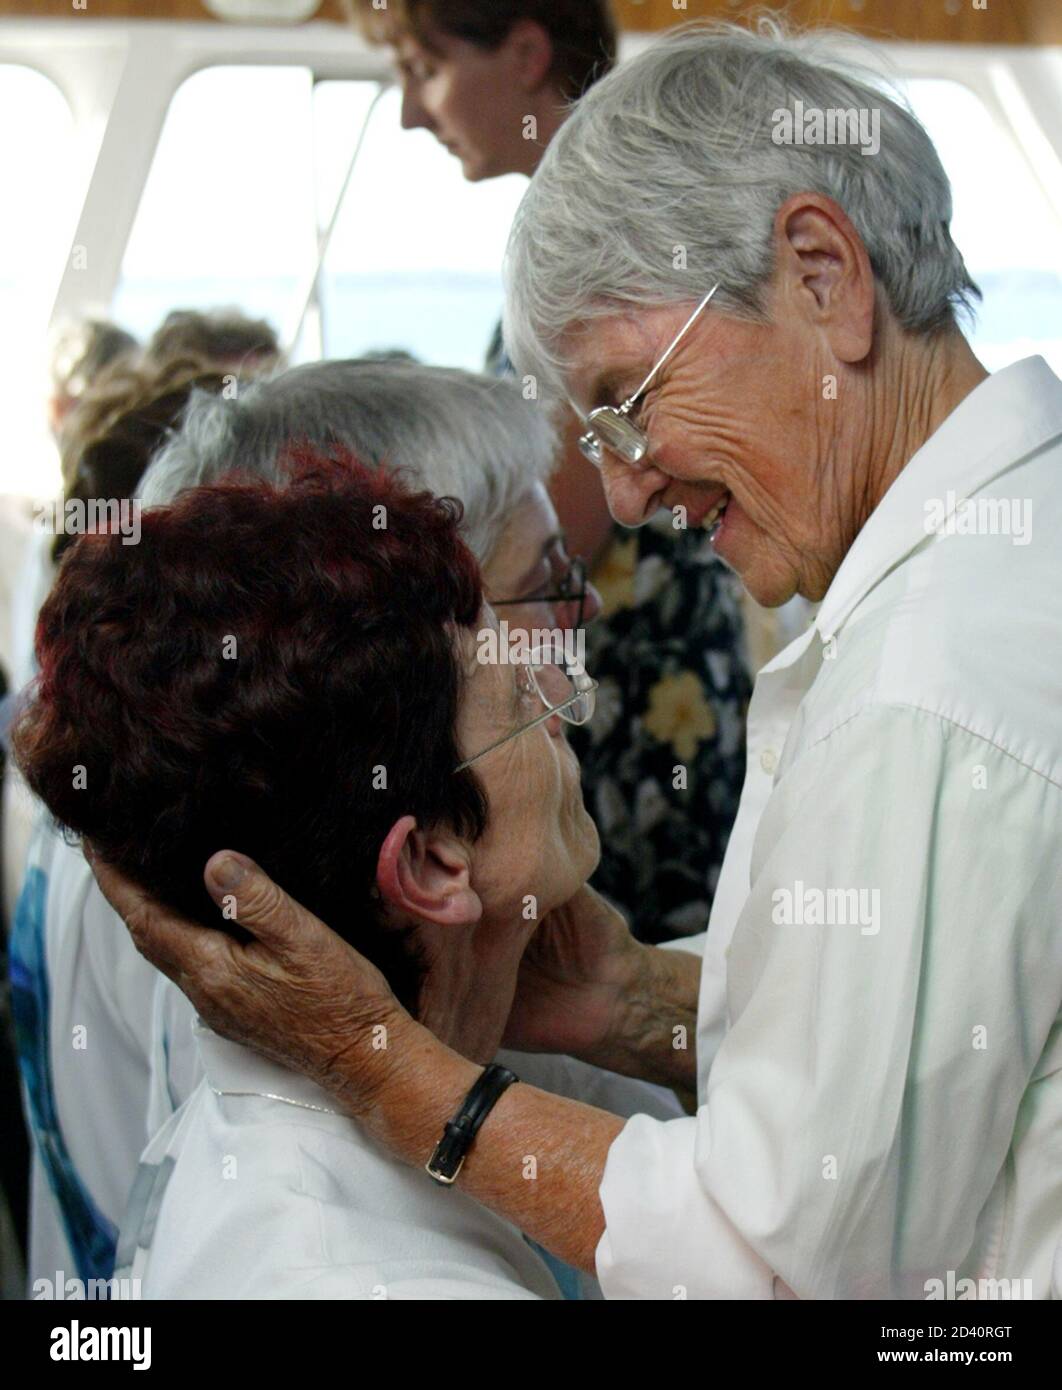 Roman Catholic Michele Birch-Conery (L) is congratulated by a supporter during a ceremony on a boat in international waters on the St. Lawrence Seaway near Gananoque, Ontario July 25, 2005. Nine North American Catholic women, including Birch-Conery, were unofficially ordained priests or deacons in an unsanctioned ceremony on Monday. The ordinations are not valid within the Catholic Church. REUTERS/Chris Wattie  CW/DH Stock Photo